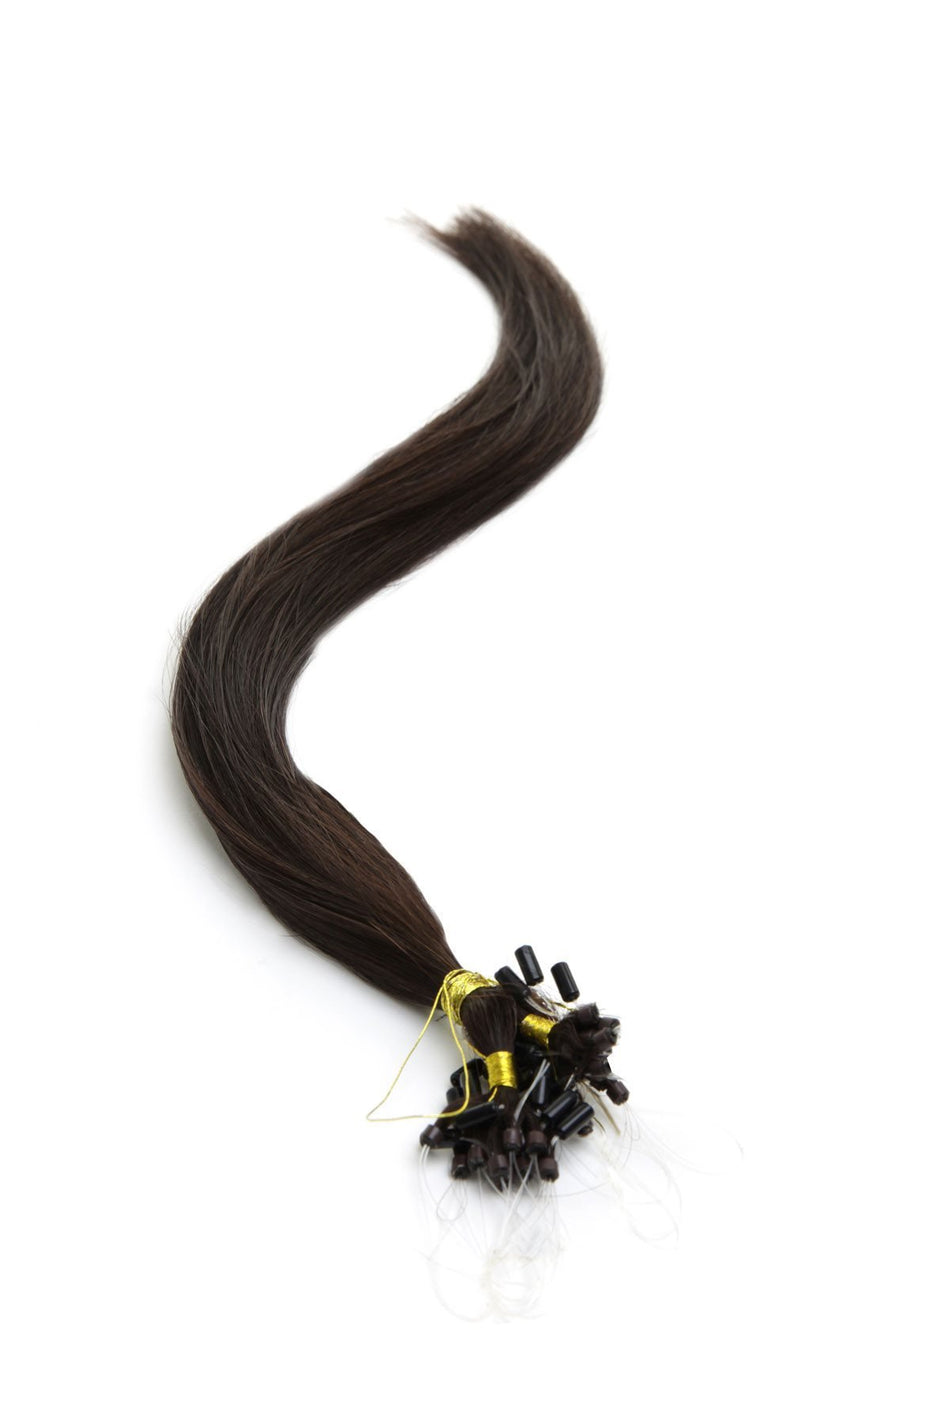 Micro Ring Hair Extensions | 22 inch Brownest Brown (2) - Beauty Hair Products LtdHair Extensions